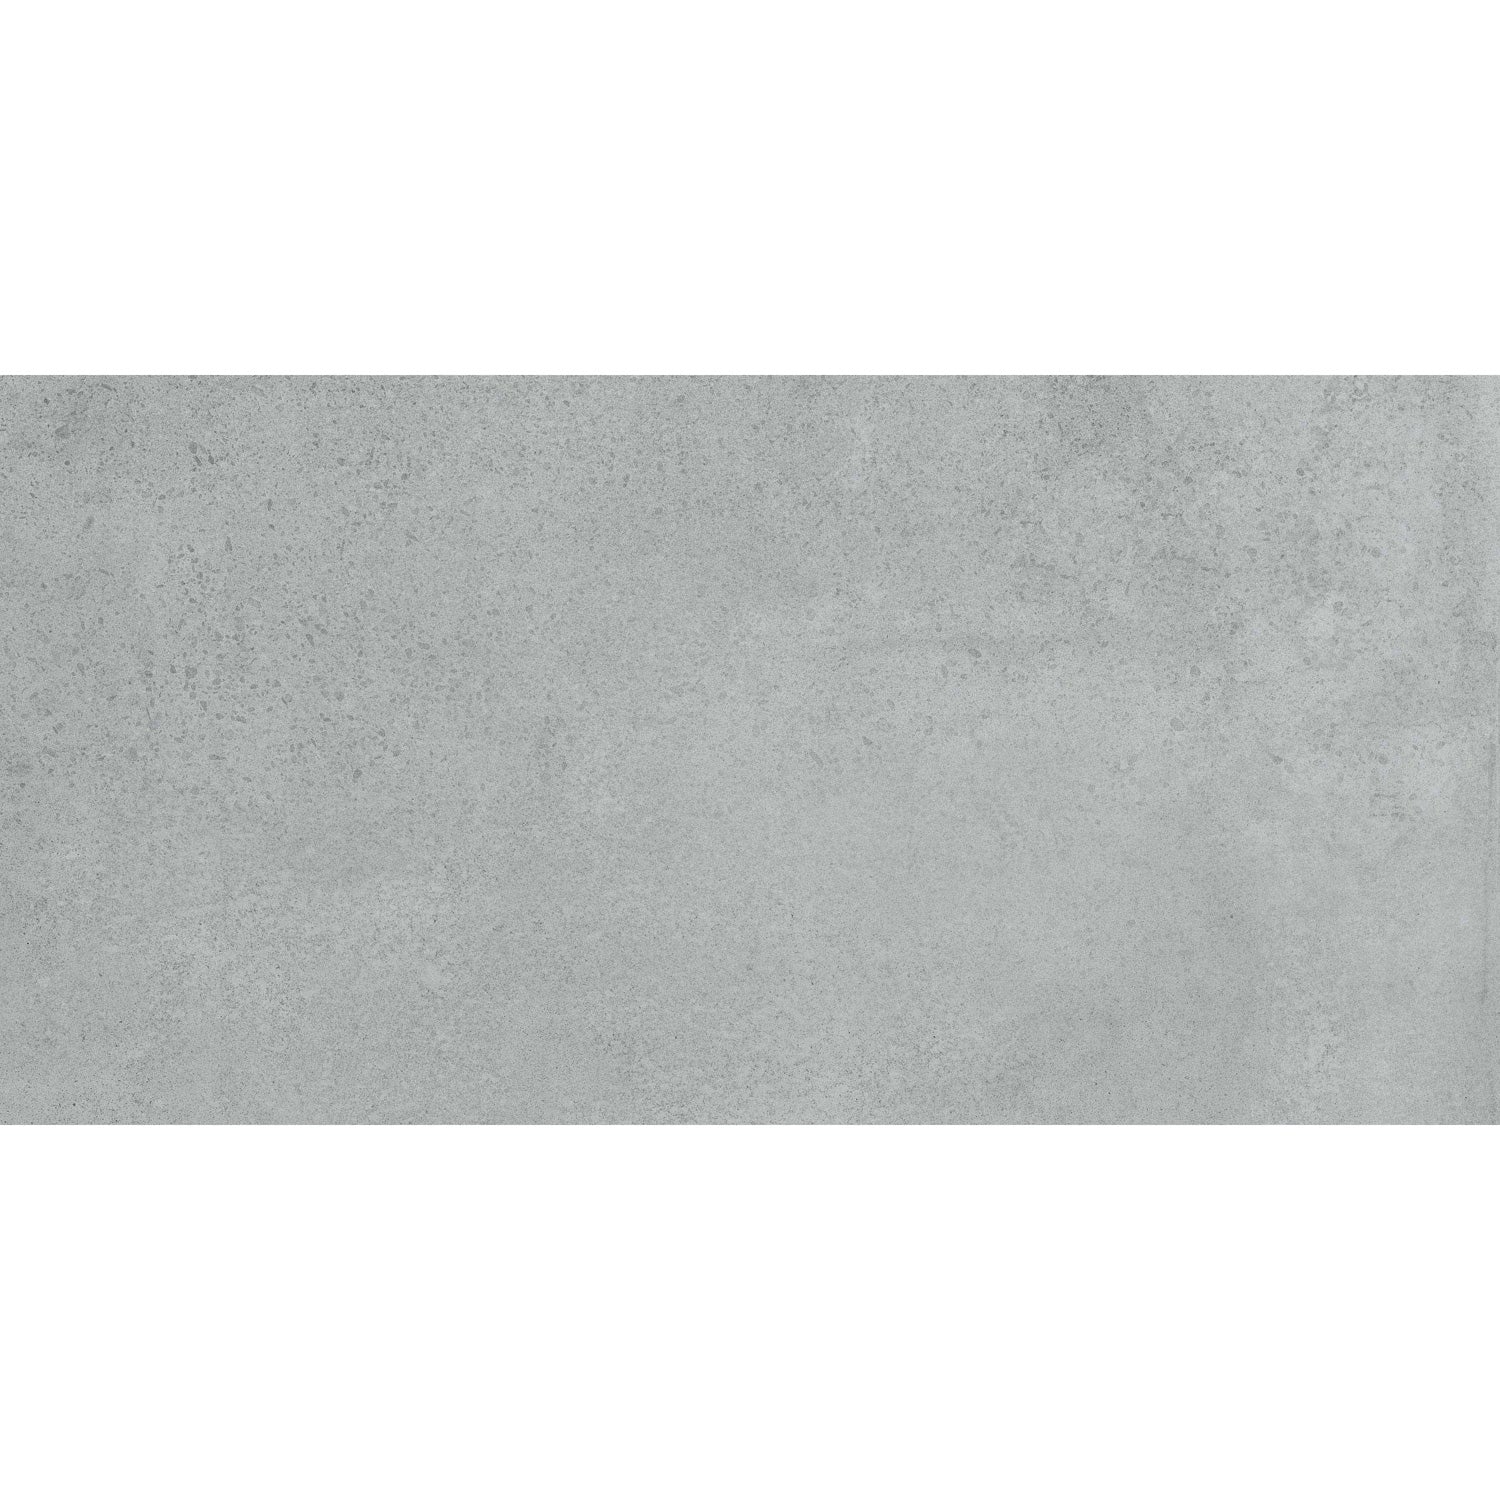 Anatolia - Industria HD Porcelain 12 in. x 24 in. Tile - Lithium